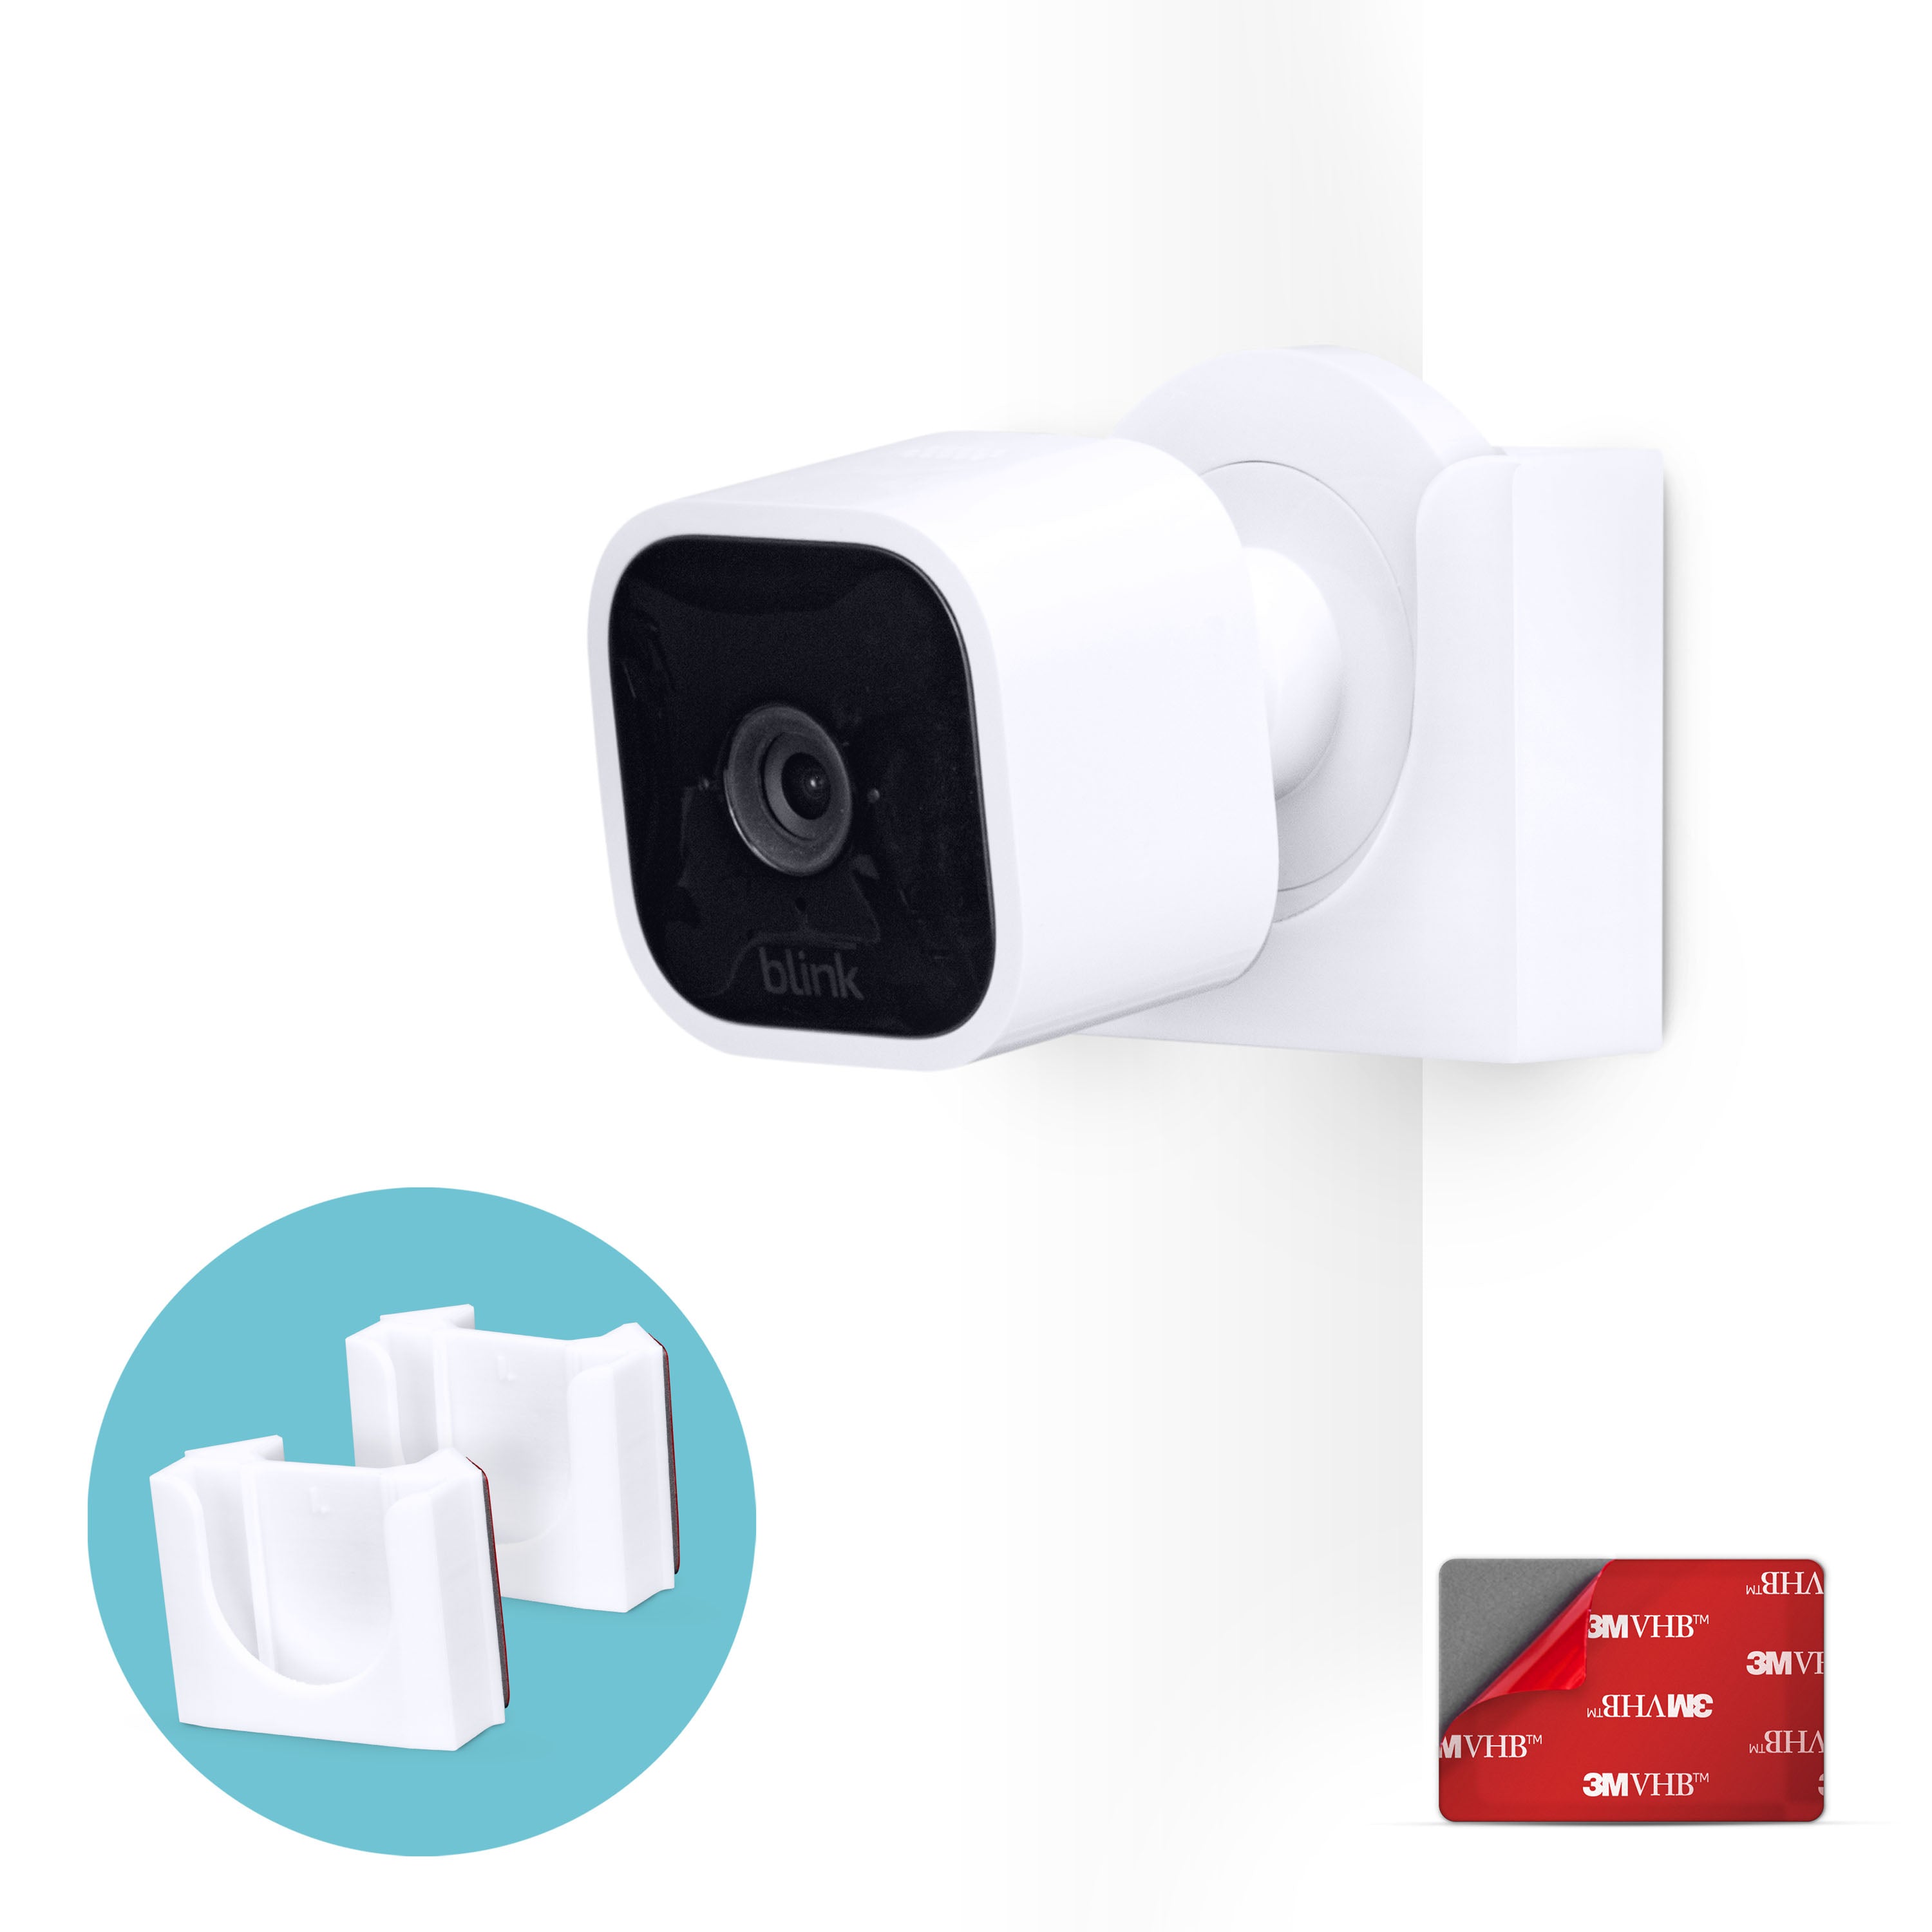 Blink Mini - Compact Indoor Plug-in Smart Security camera, 1 Camera (White)